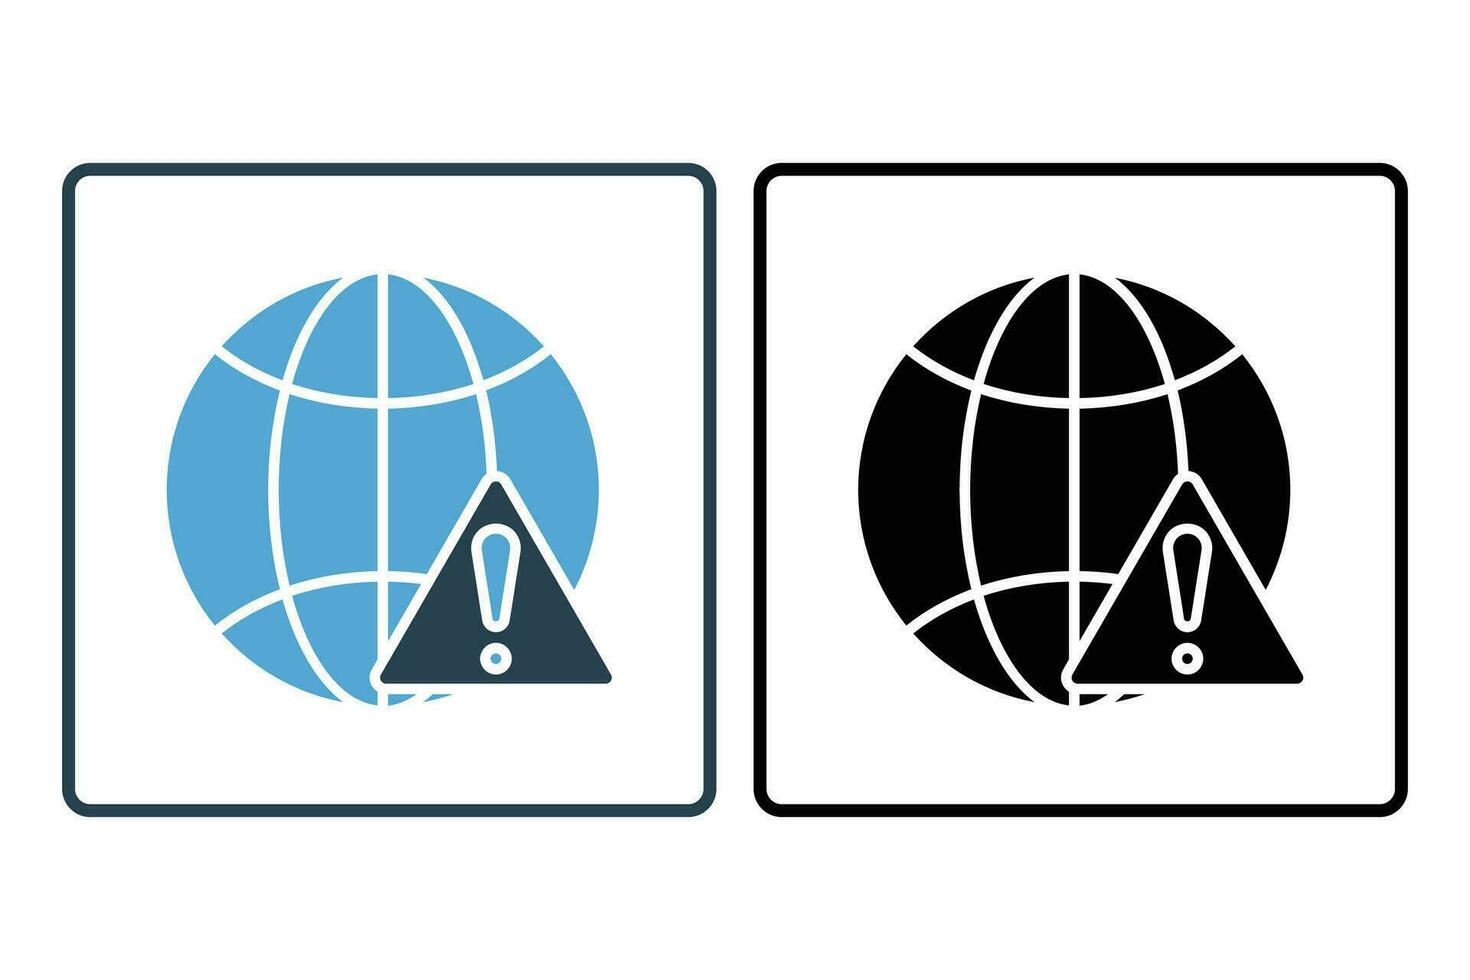 Network error icon. earth with exclamation mark. icon related to warning, notification. suitable for web site, app, user interfaces, printable etc. Solid icon style. Simple vector design editable